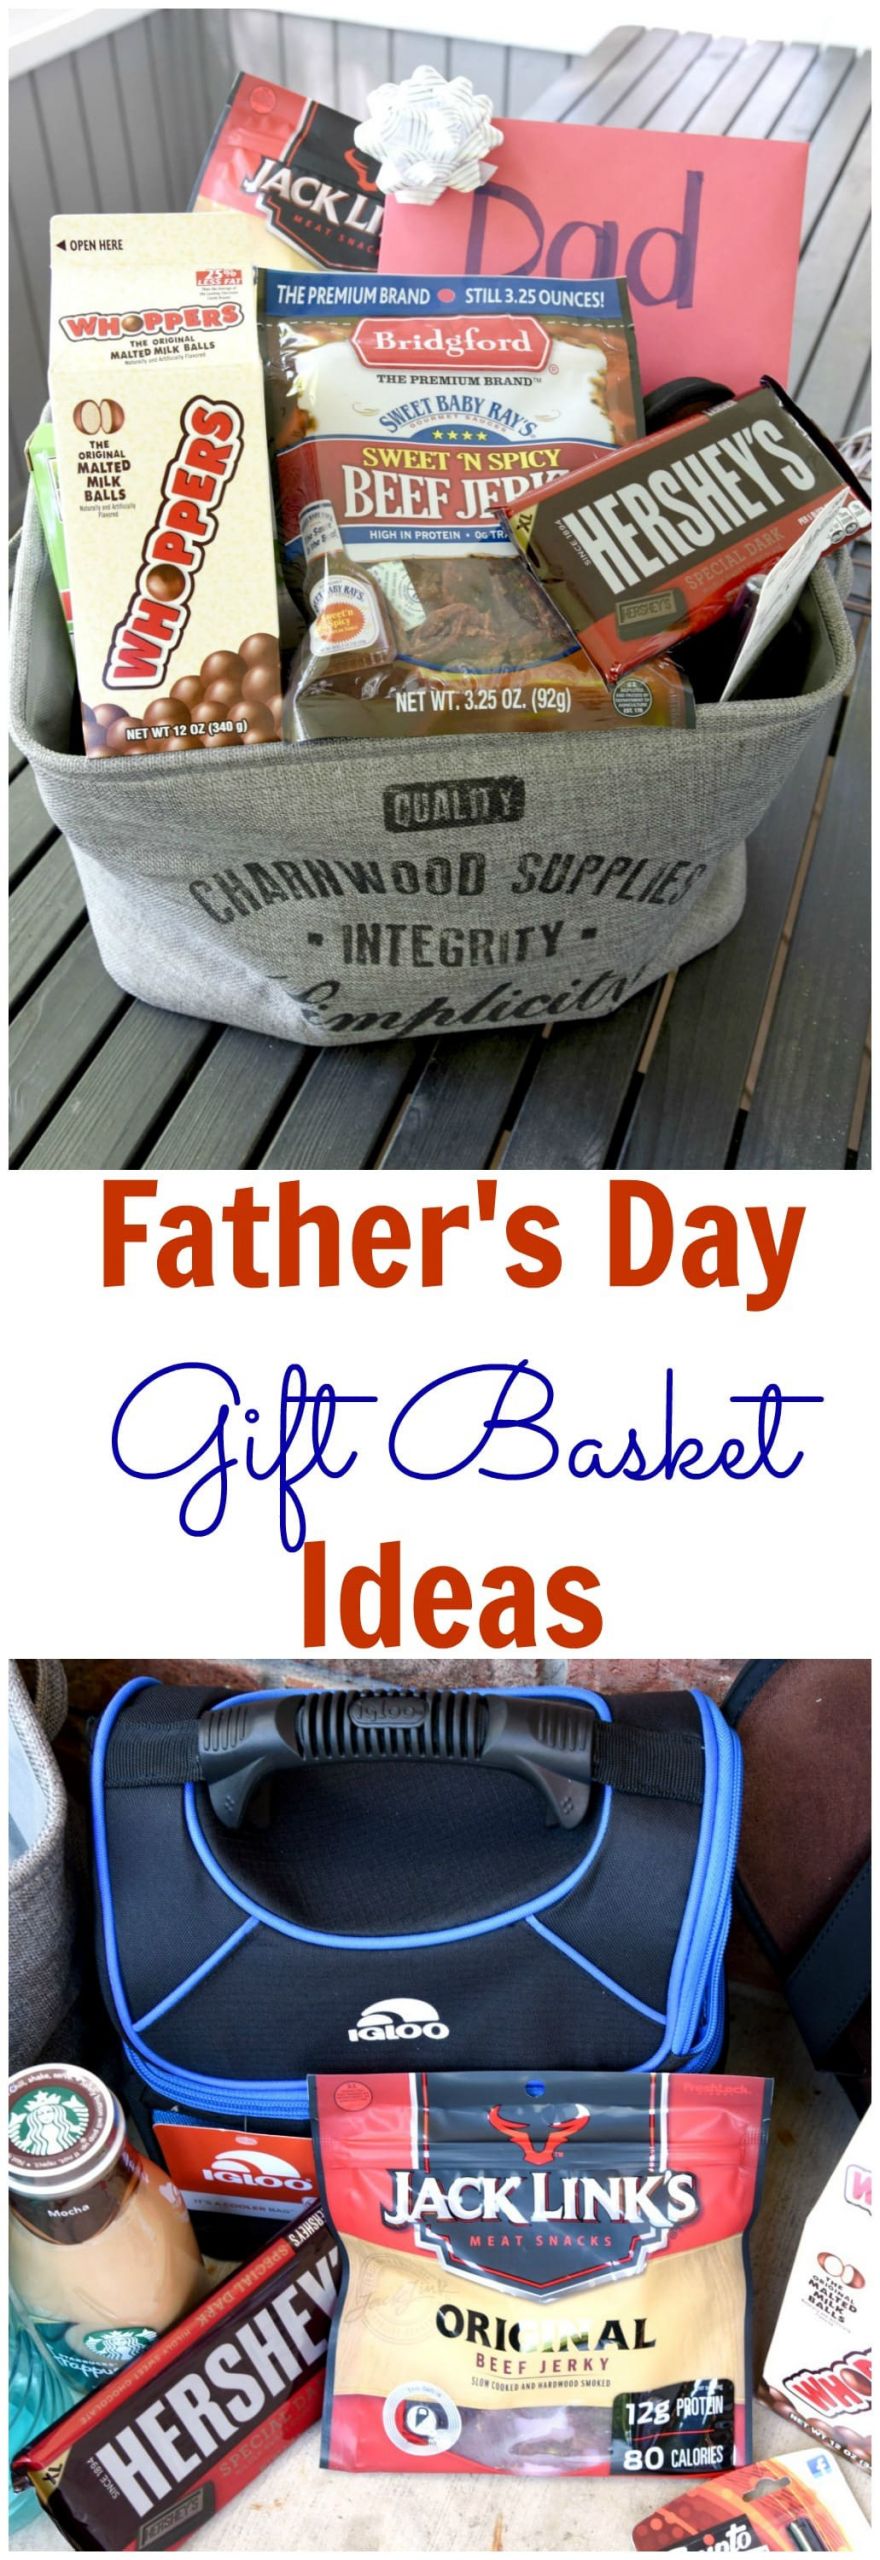 Father'S Day Picture Gift Ideas
 Tips to Create a Father s Day Gift Basket Dad will Love